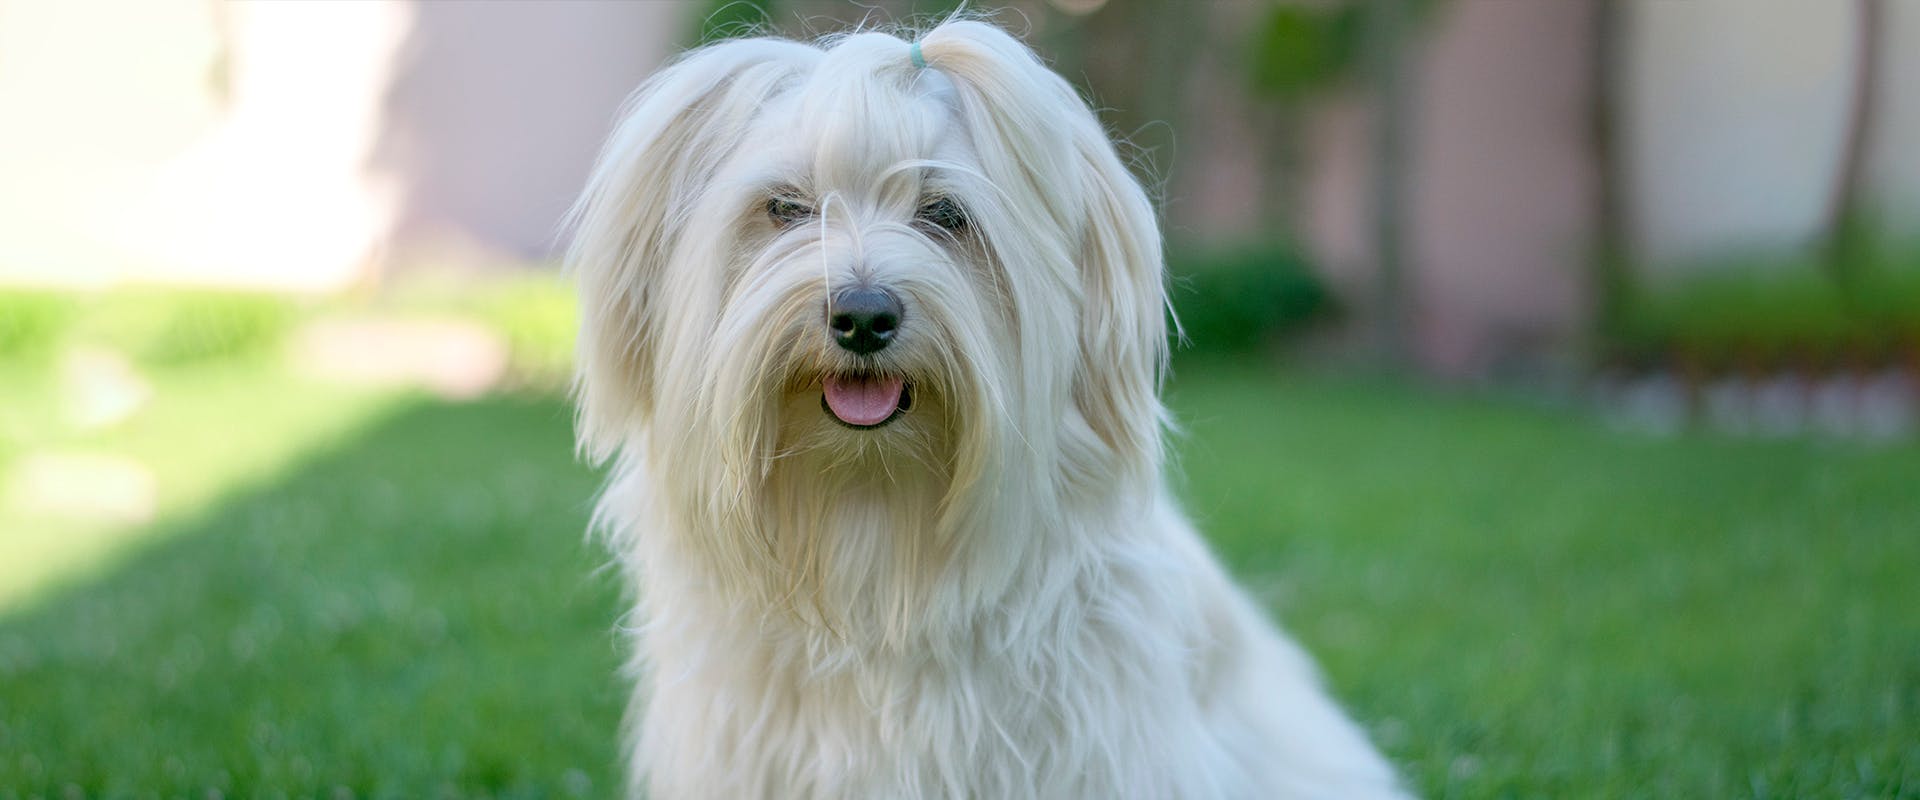 A long-haired white Havanese dog